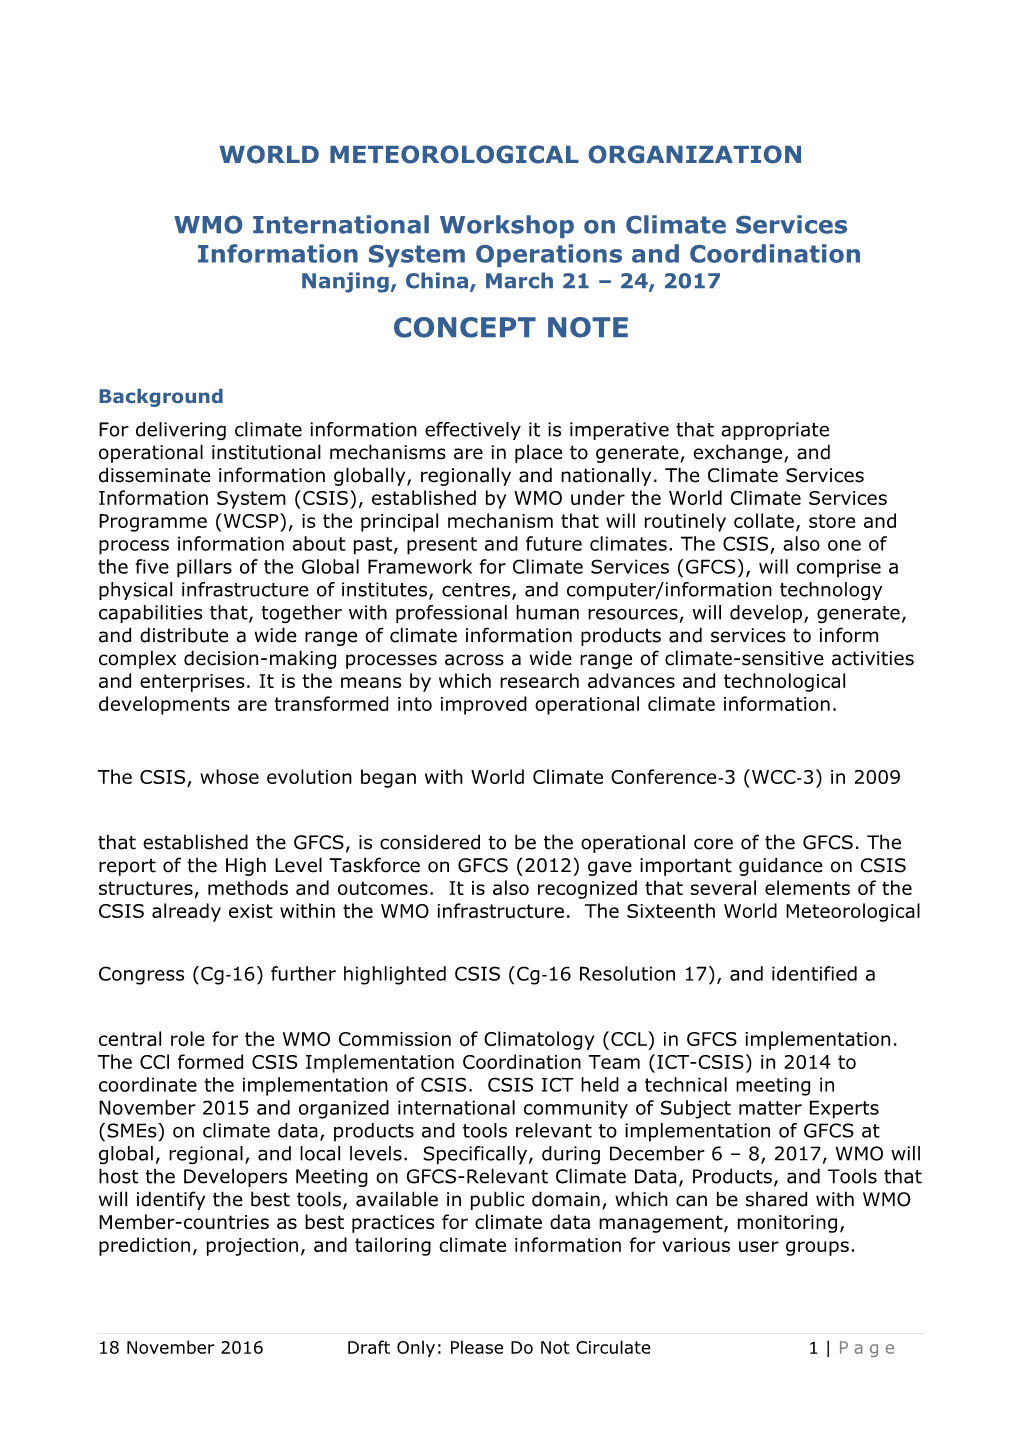 WMO International Workshop on Climate Services Information System Operations and Coordination